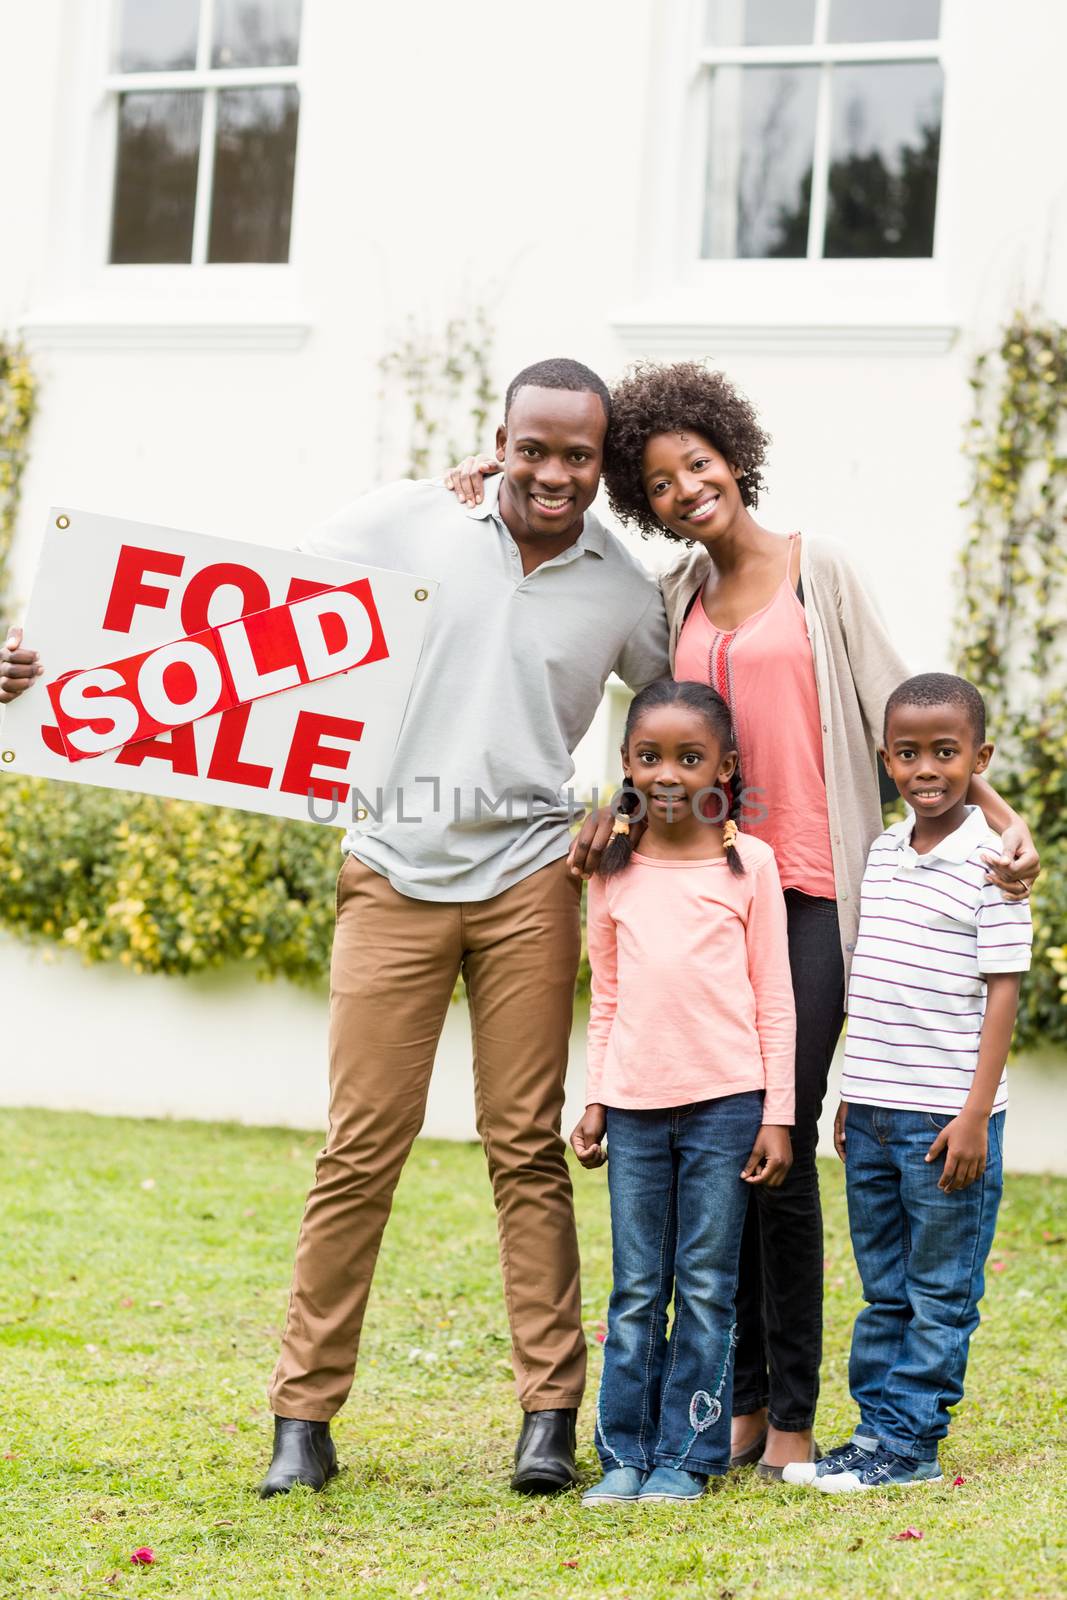 Happy family standing together while holding a sold sign